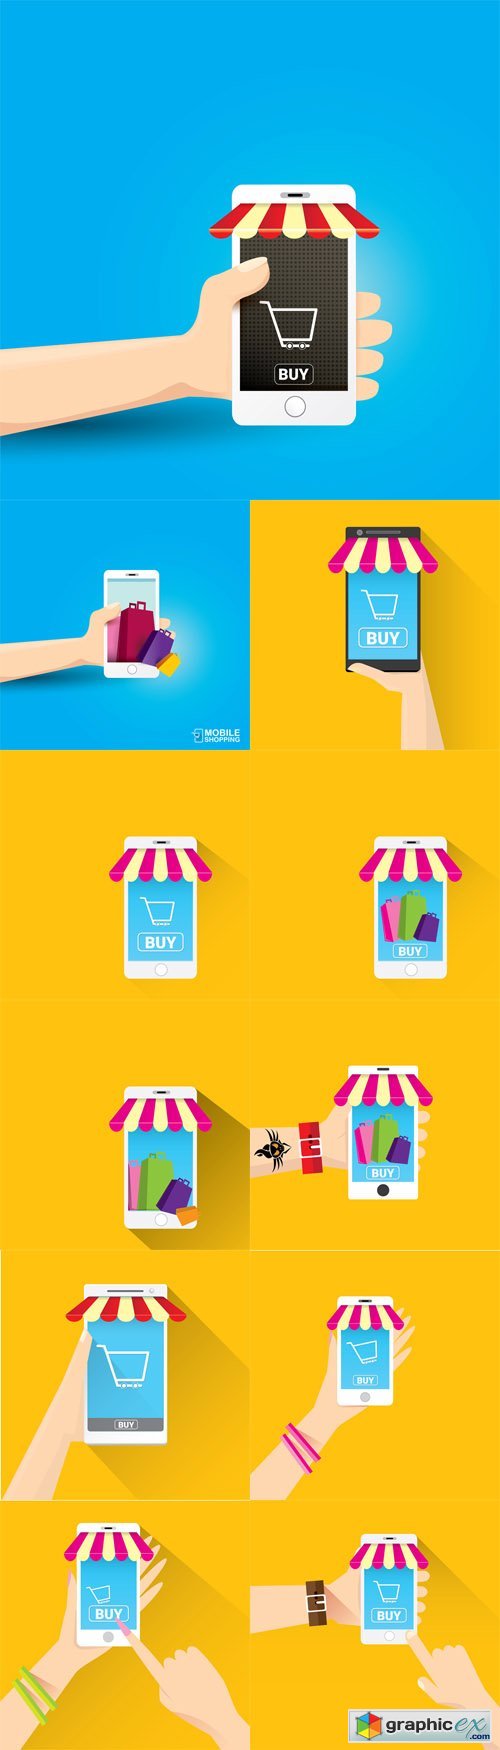 Online Mobile Shopping Concept Backgrounds